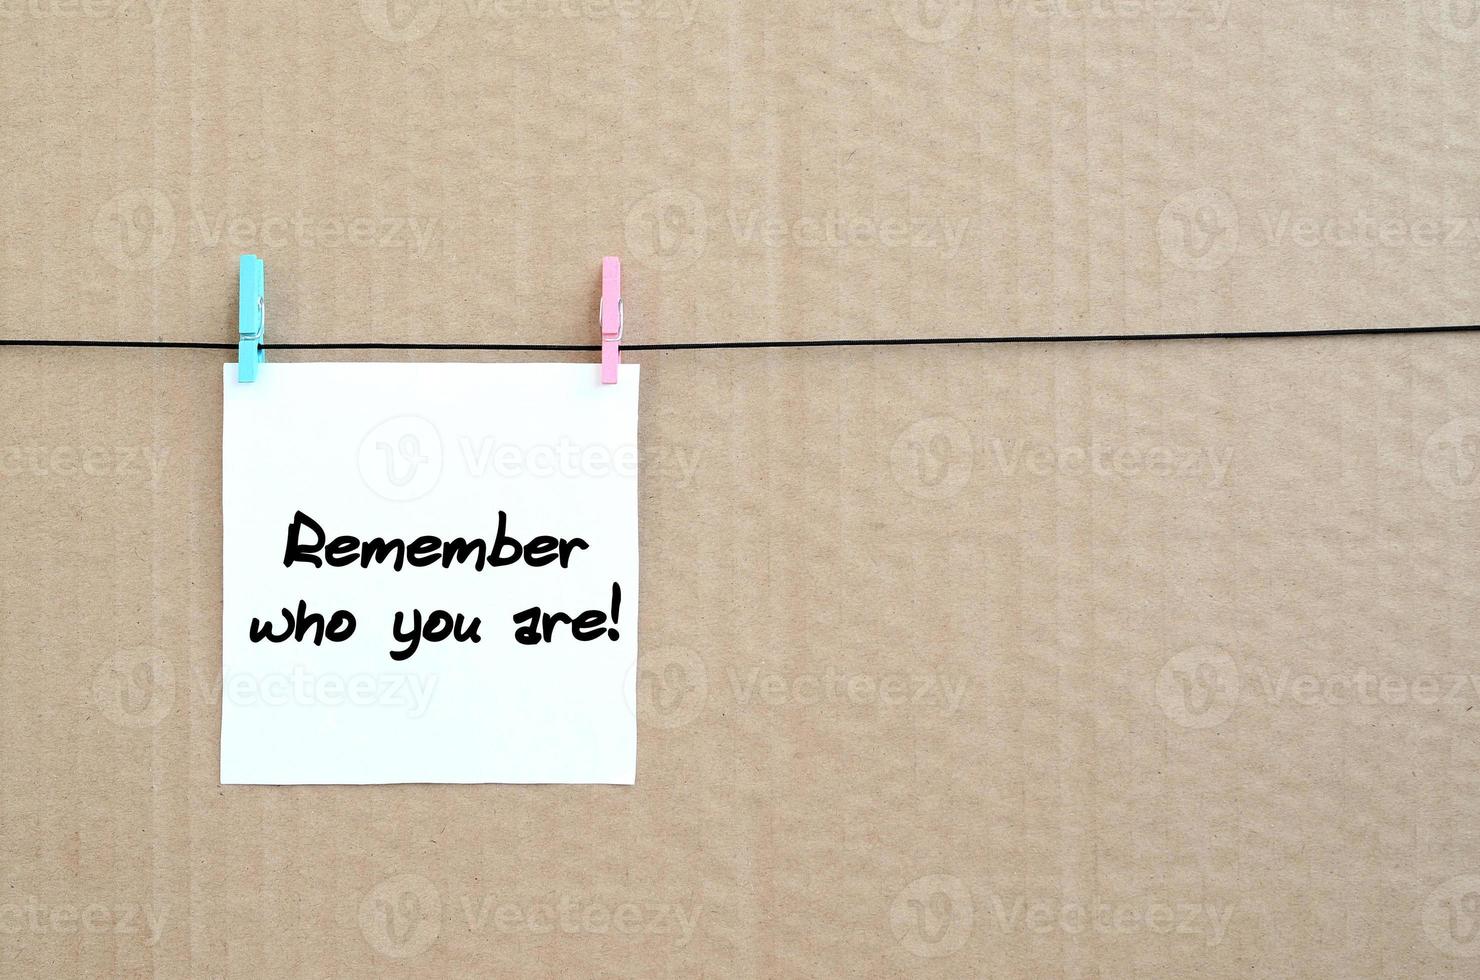 Remember who you are Note is written on a white sticker that hangs with a clothespin on a rope on a background of brown cardboard photo